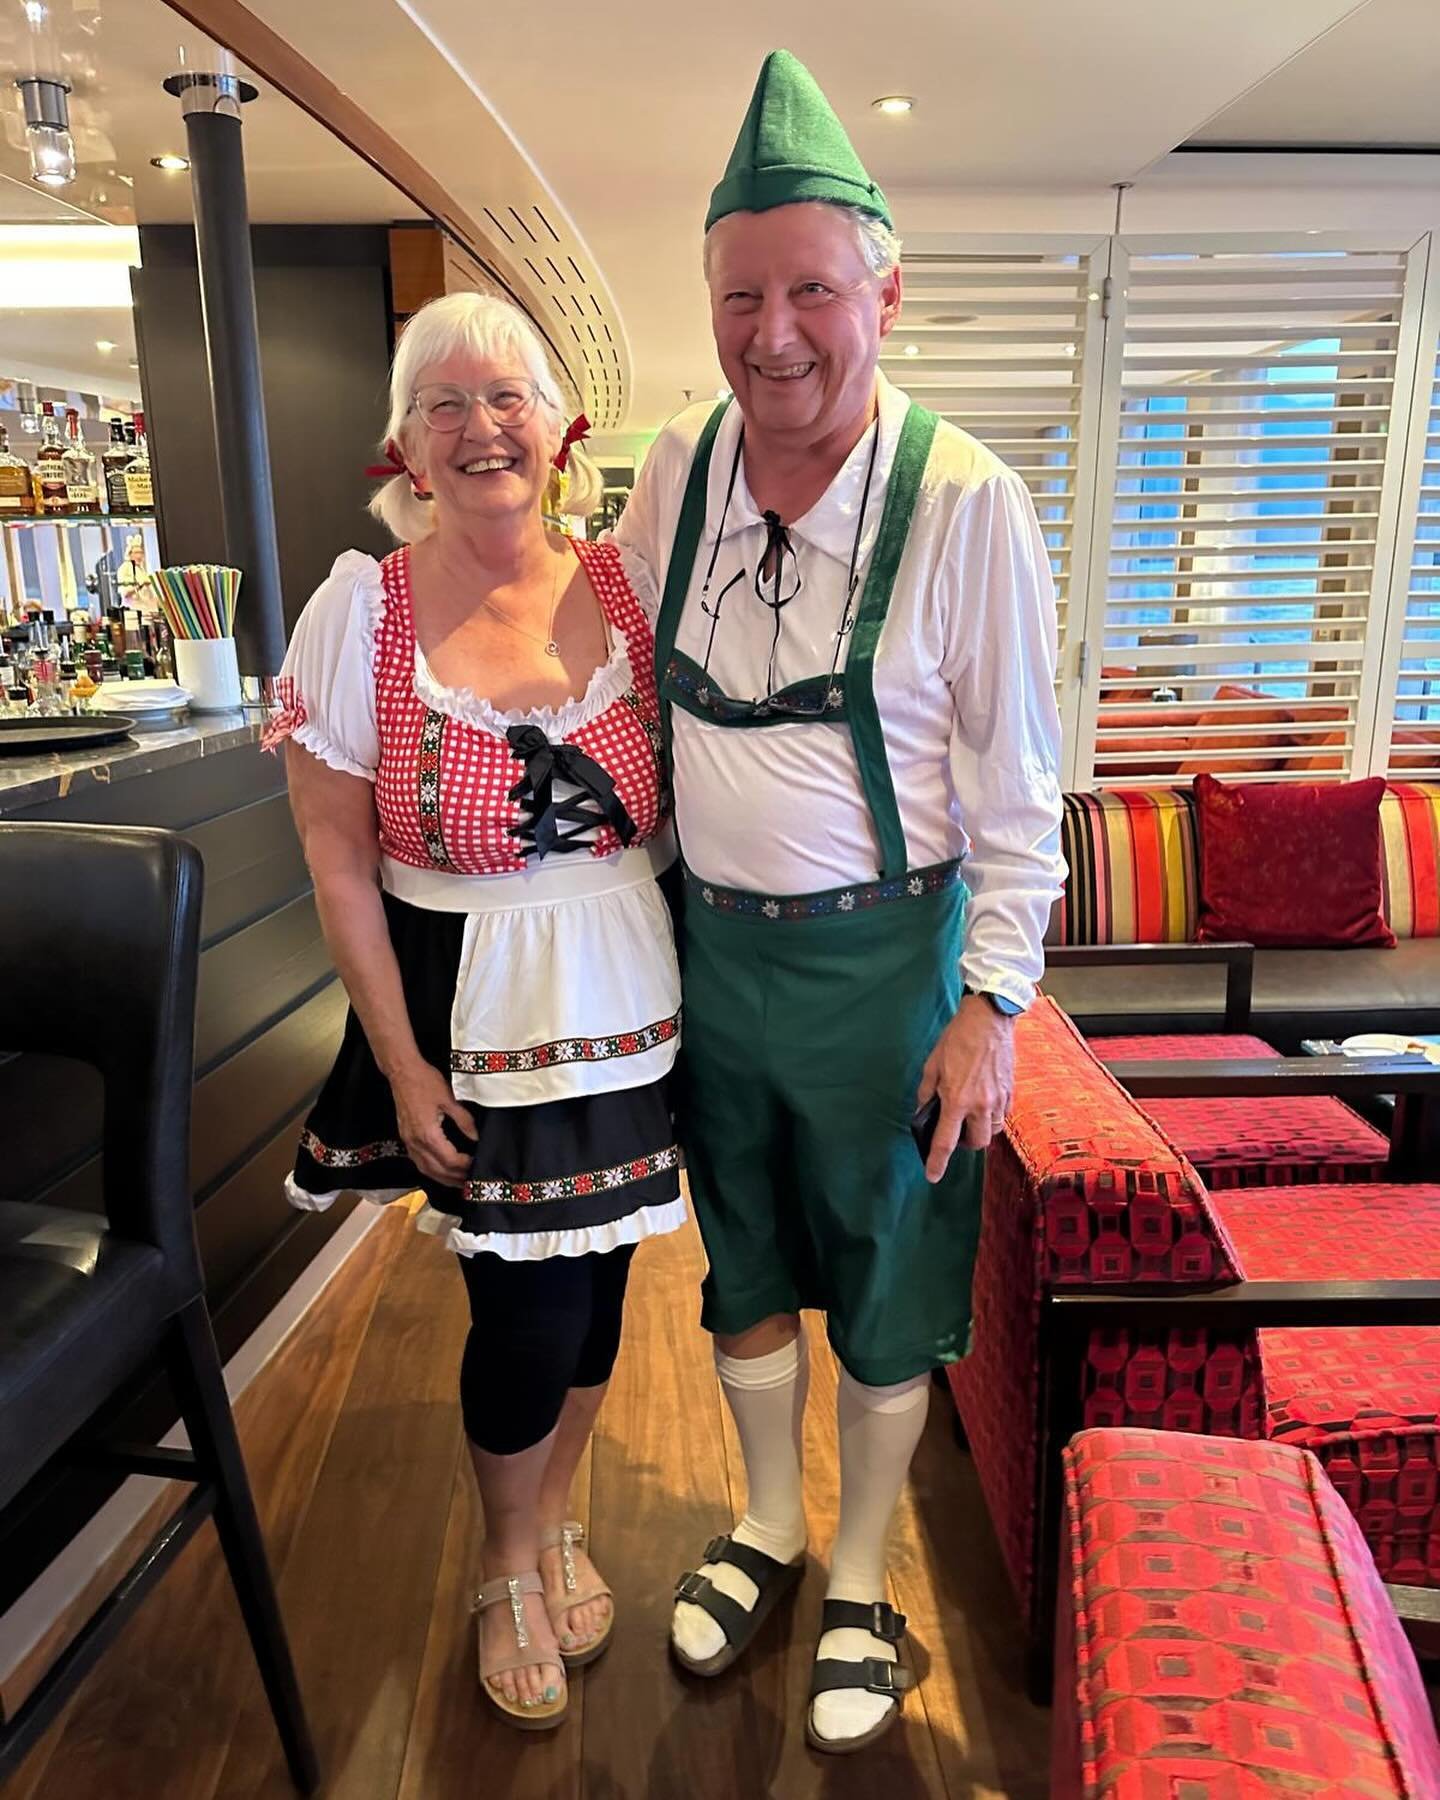 What a Fairytales and Chocolates party we had on the Rhine cruise! So many laughs and great creative costumes!  #jeannettedouglasdesigns  #jeannettedouglas #amawaterwaysrivercruise #amawaterways #rhinerivercruise #jddtravels  #thesilverneedle